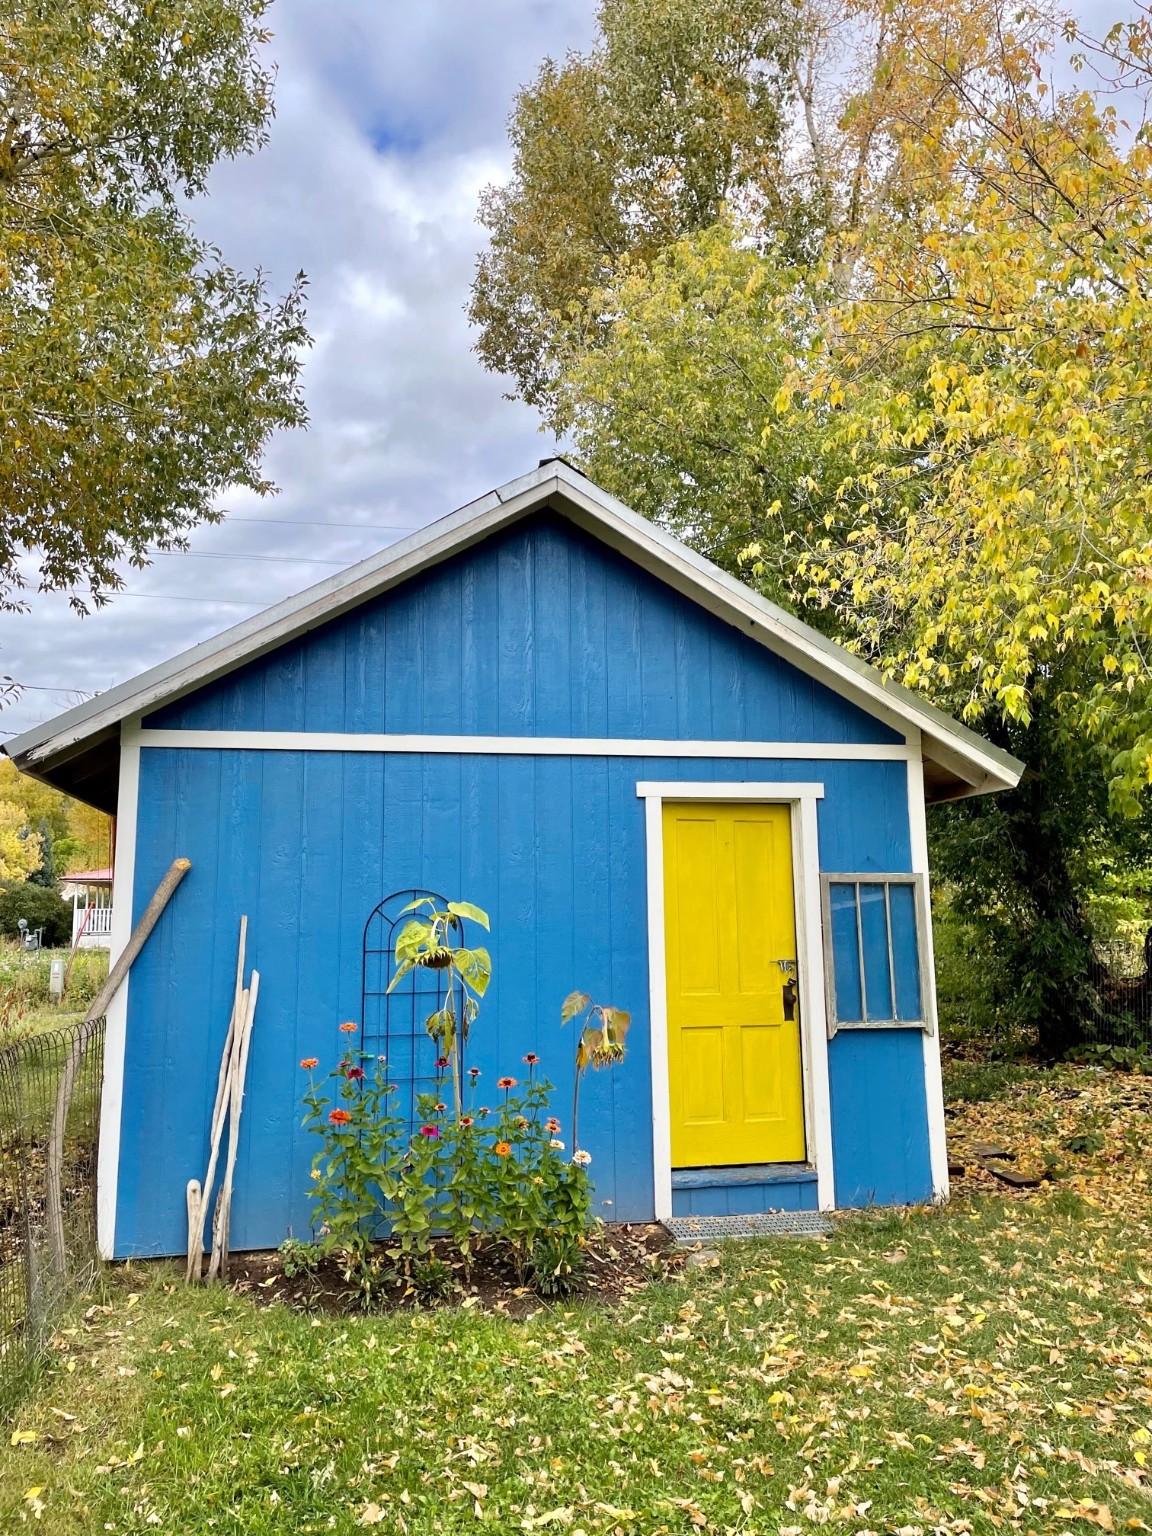 103 Maple Avenue, Chama, New Mexico 87520, 2 Bedrooms Bedrooms, ,1 BathroomBathrooms,Residential,For Sale,103 Maple Avenue,202233352